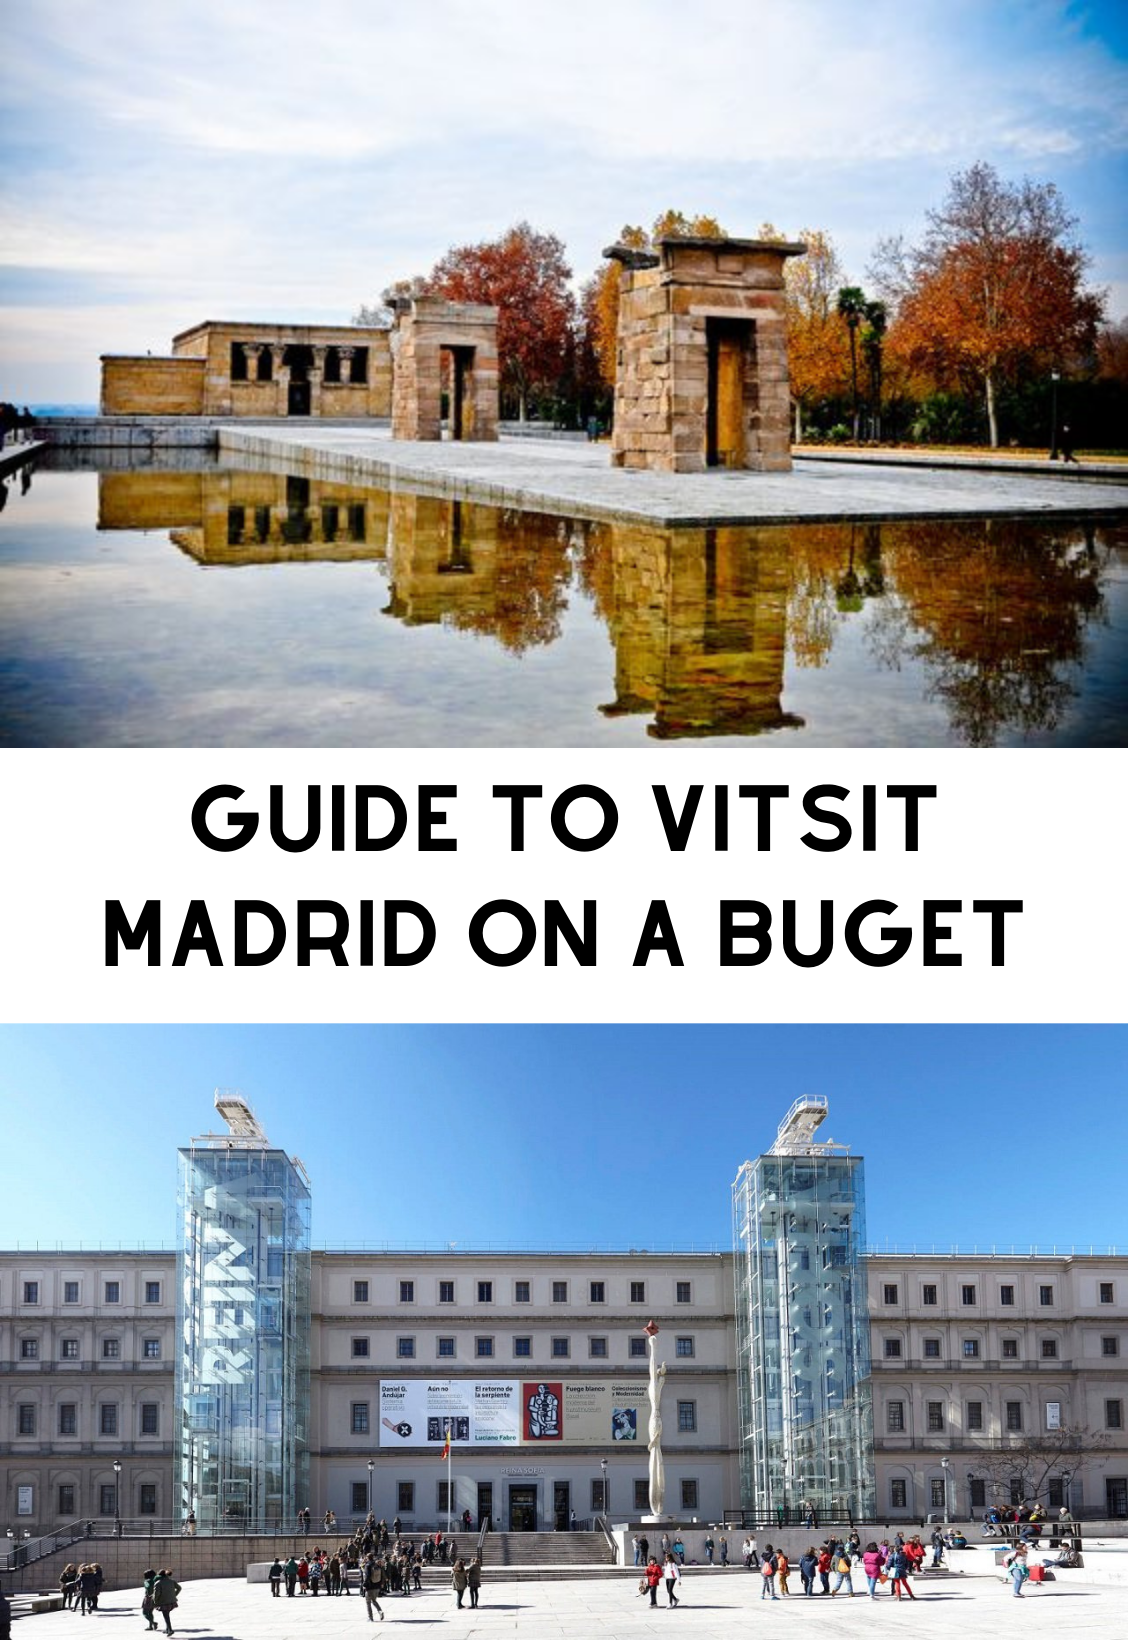 Guide to vitsit Madrid on a buget